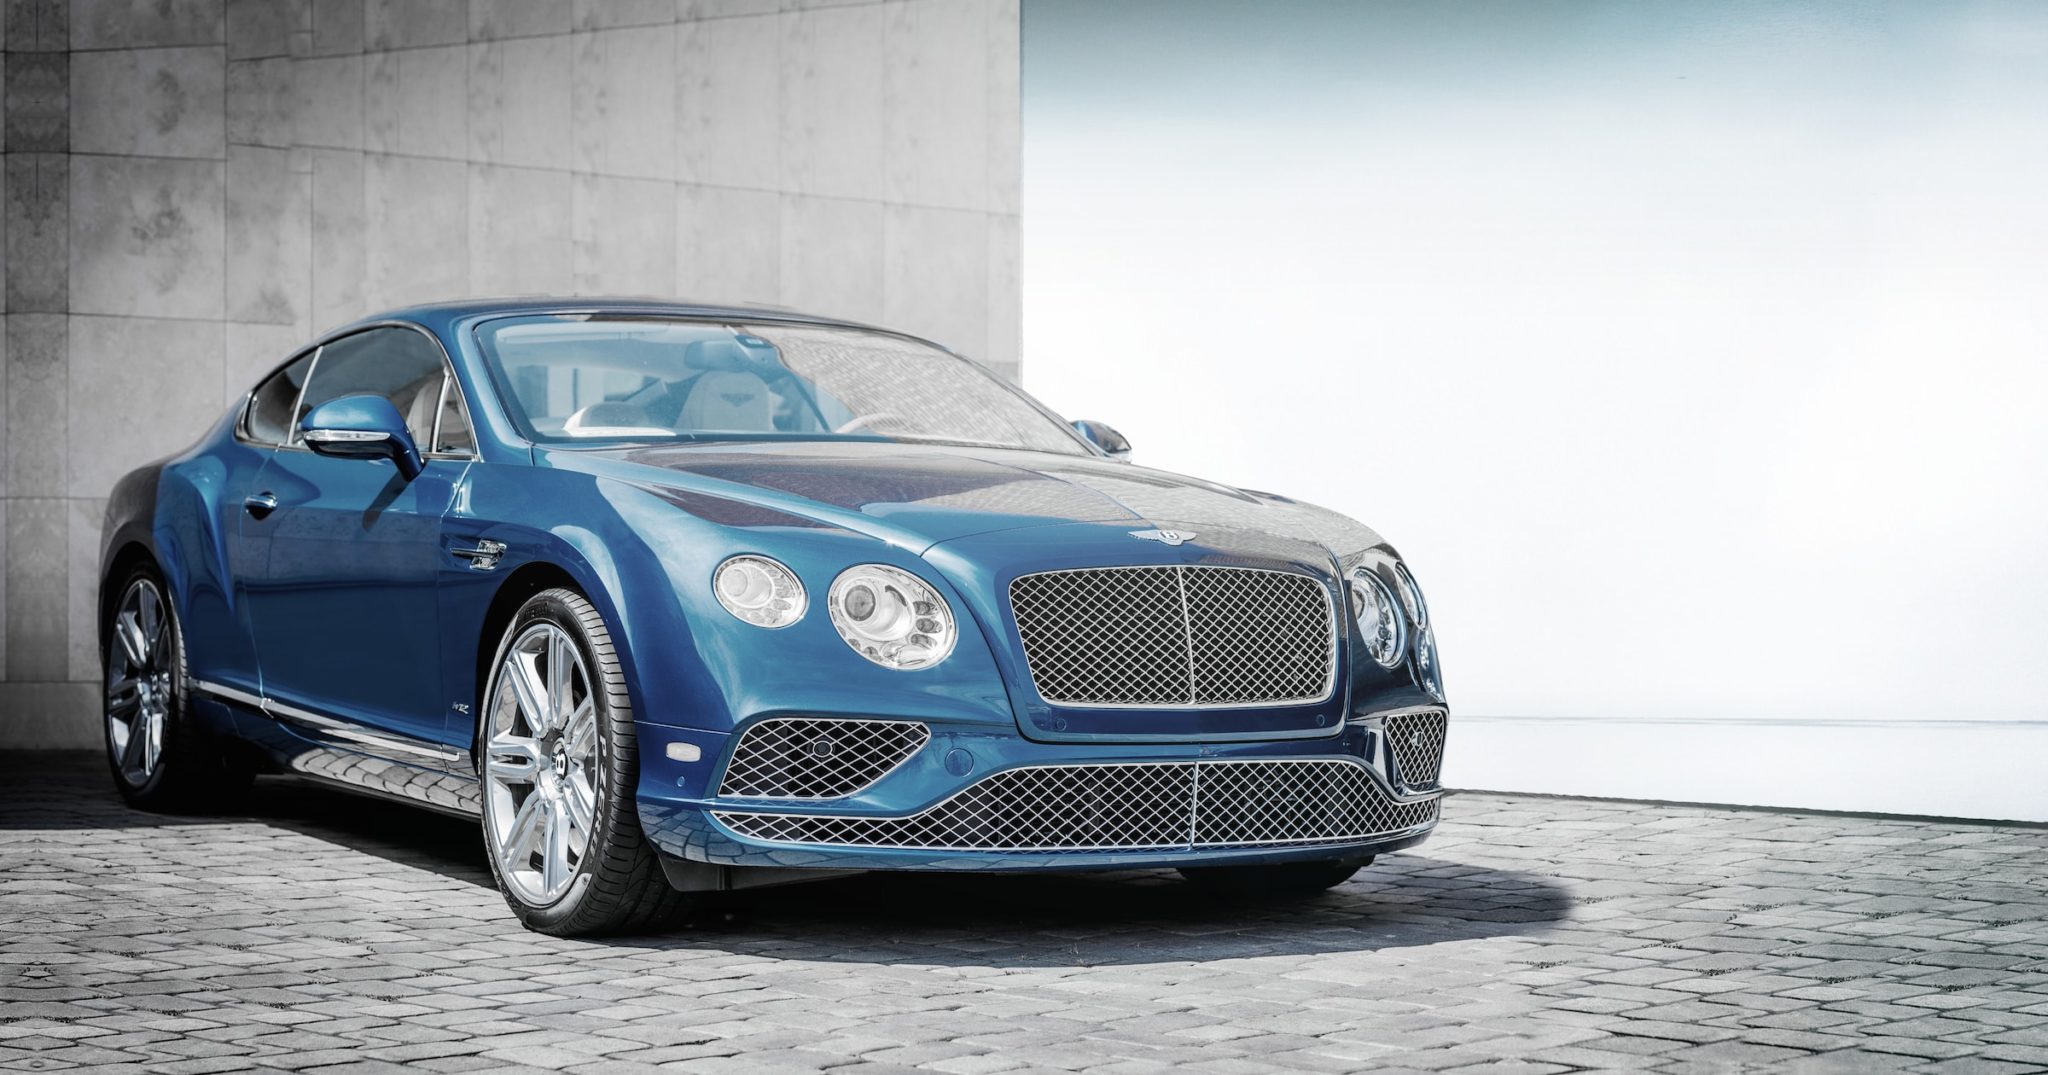 Luxury cars The top 10 of the luxury car brands Fly Aeolus